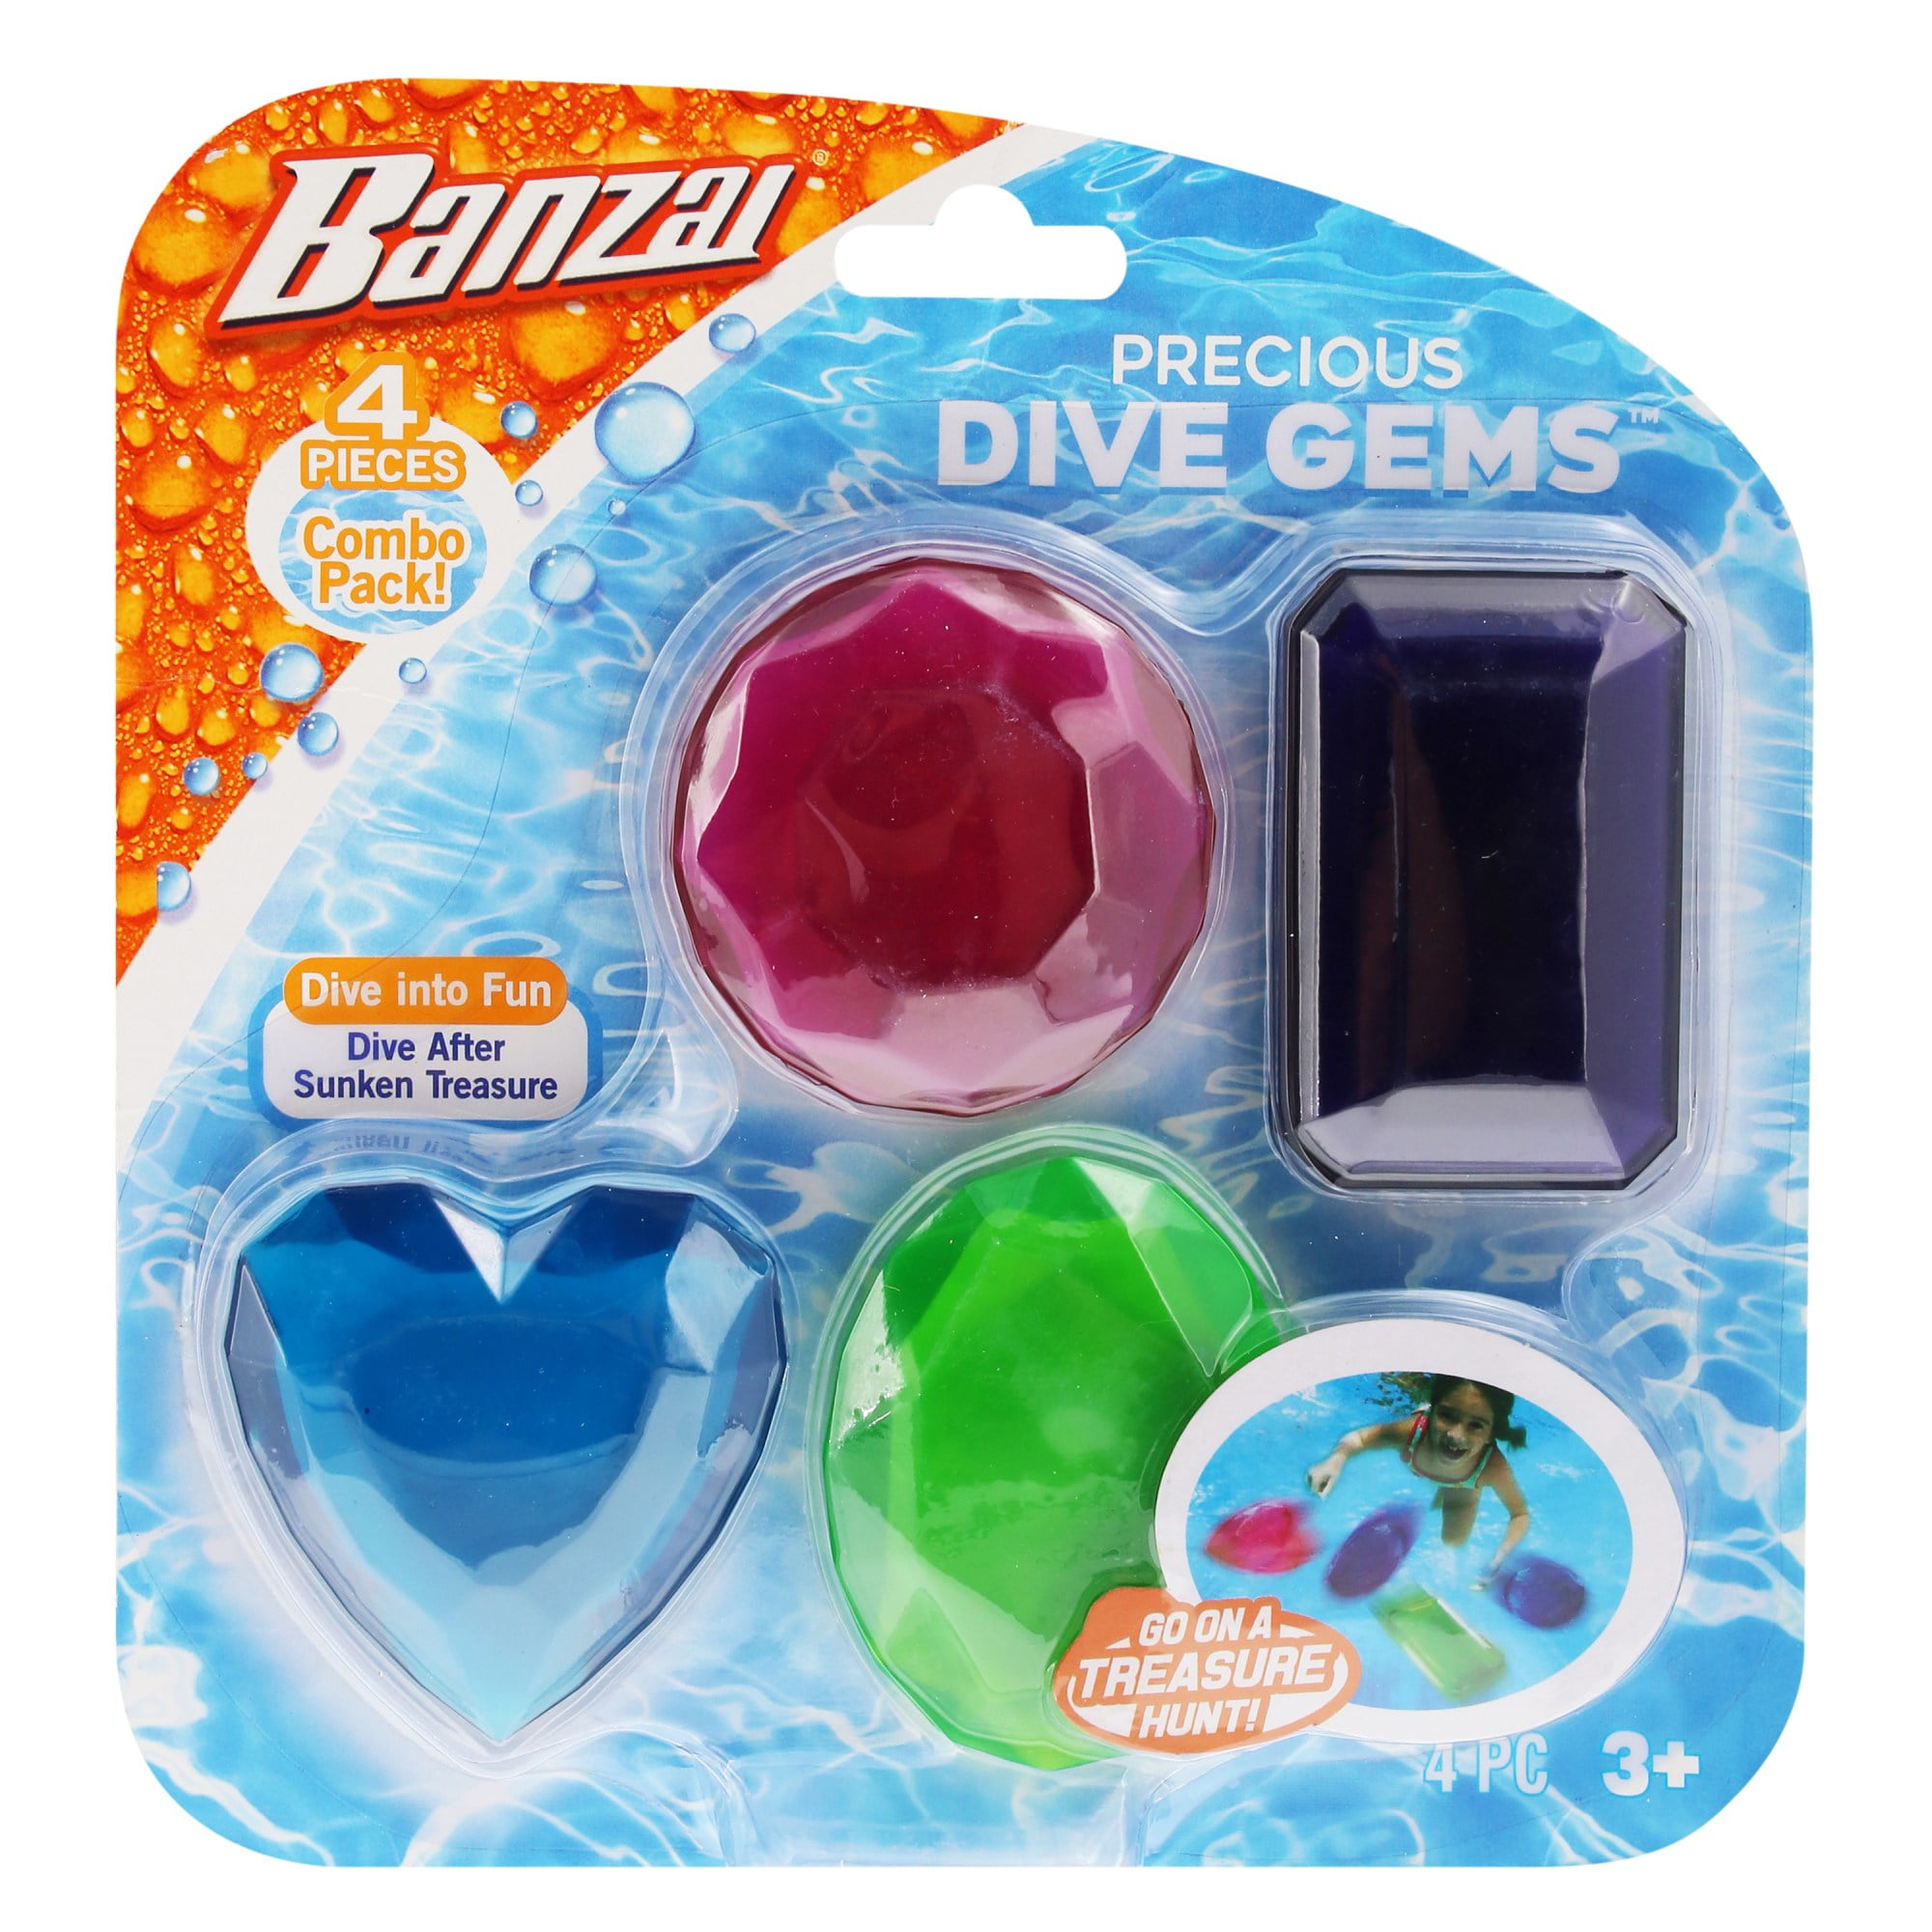 Colorful Sinking Diving Gems Dive Crystals Summer Underwater Swimming Toy Set with Velvet Bag for Games Pool Use 60 Pieces Dive Gem Pool Toys